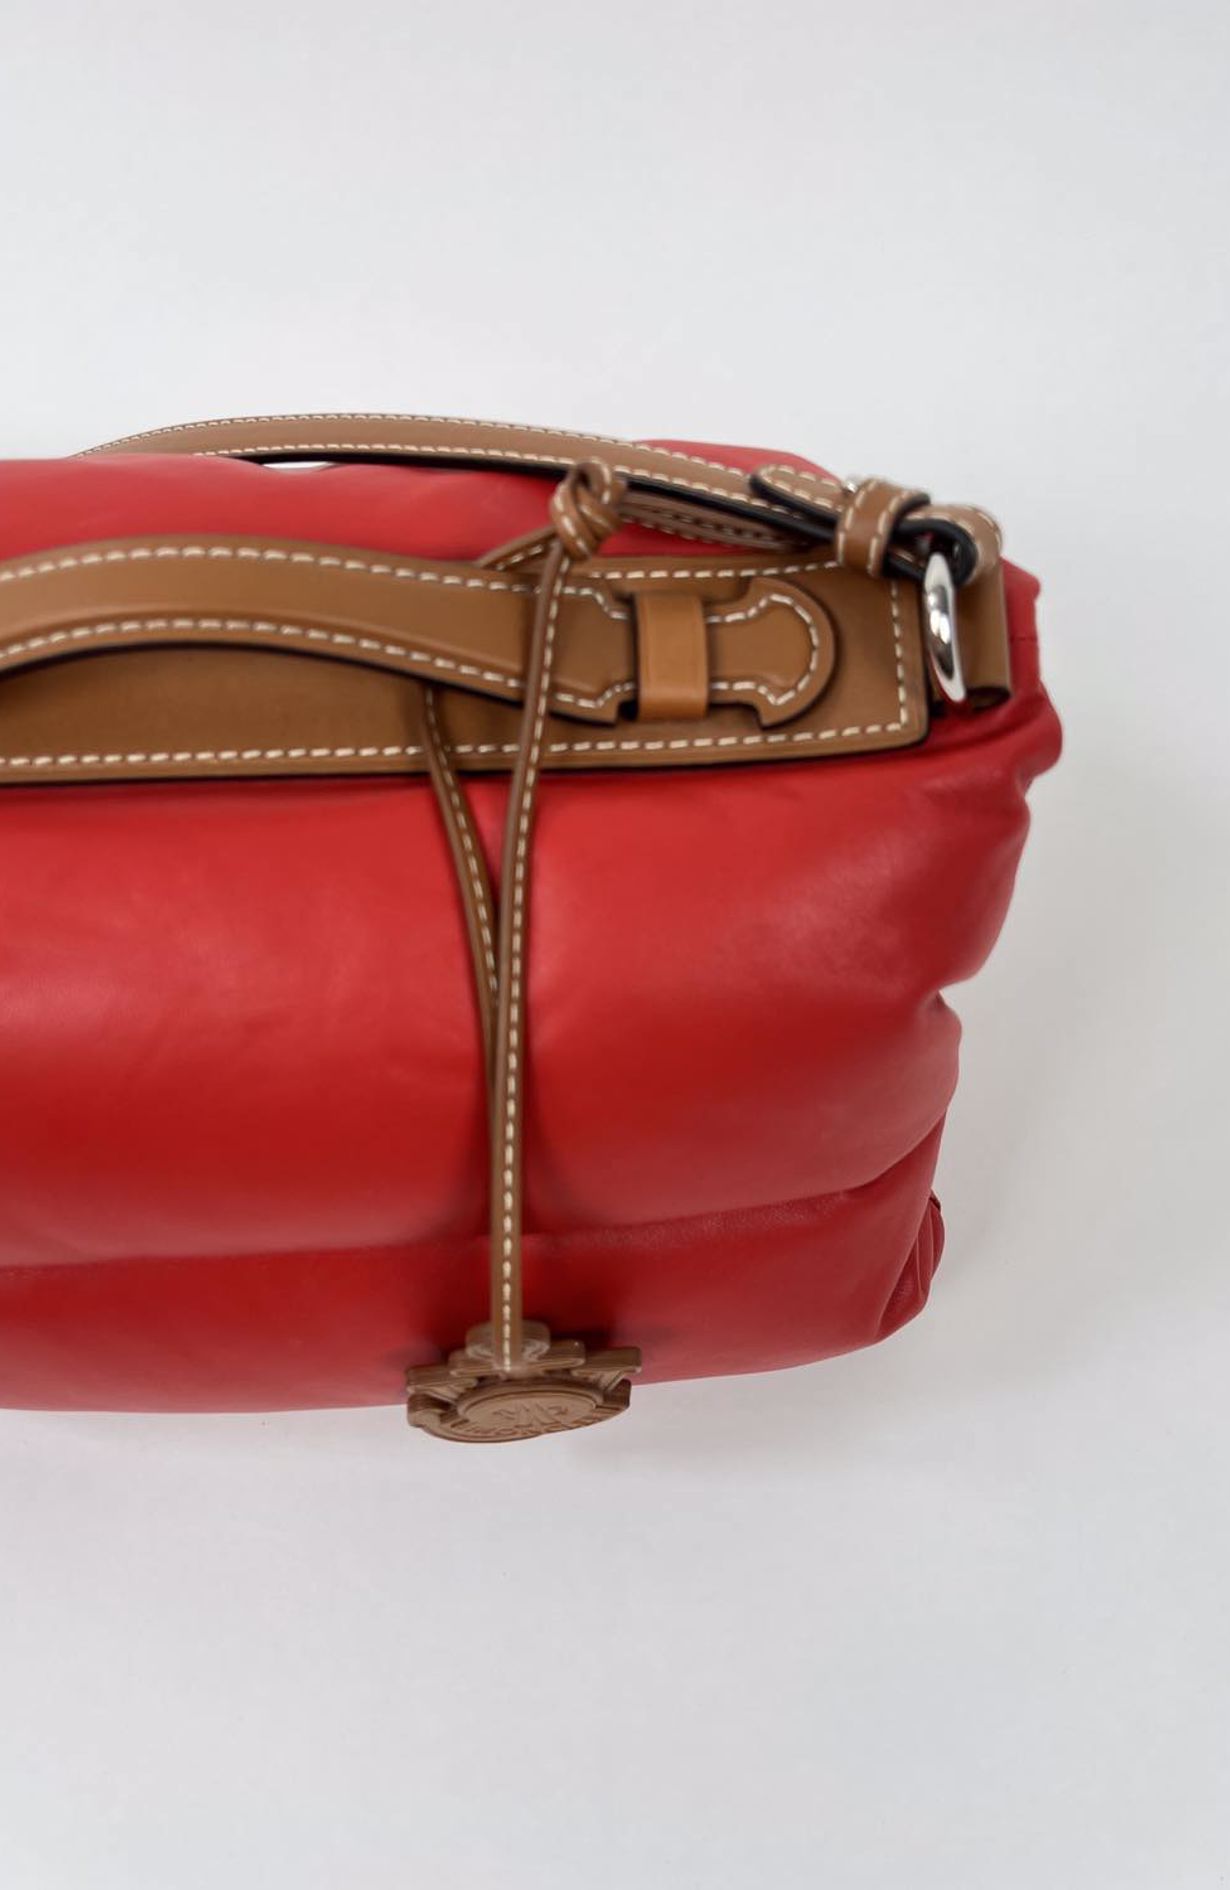 Moncler Bag Puffer Red + Dustbag 